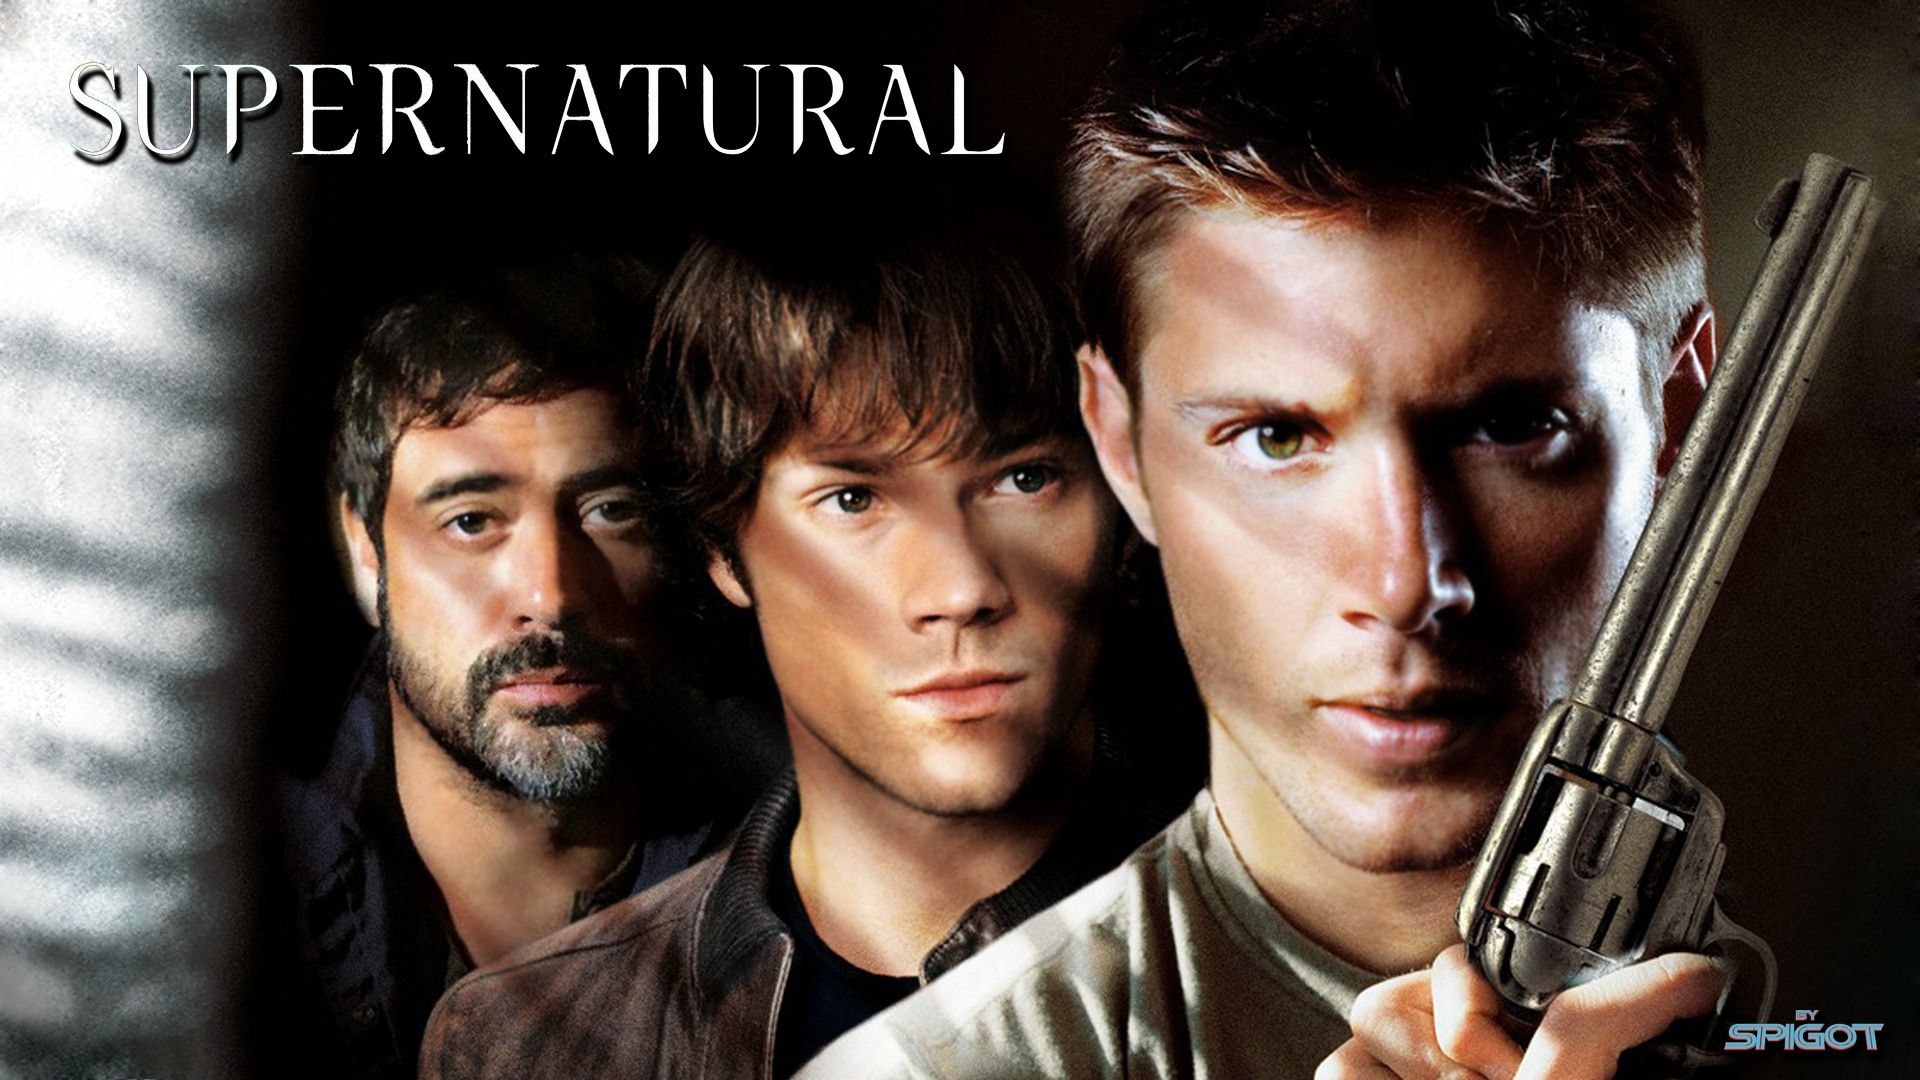 140 Supernatural HD Wallpapers and Backgrounds